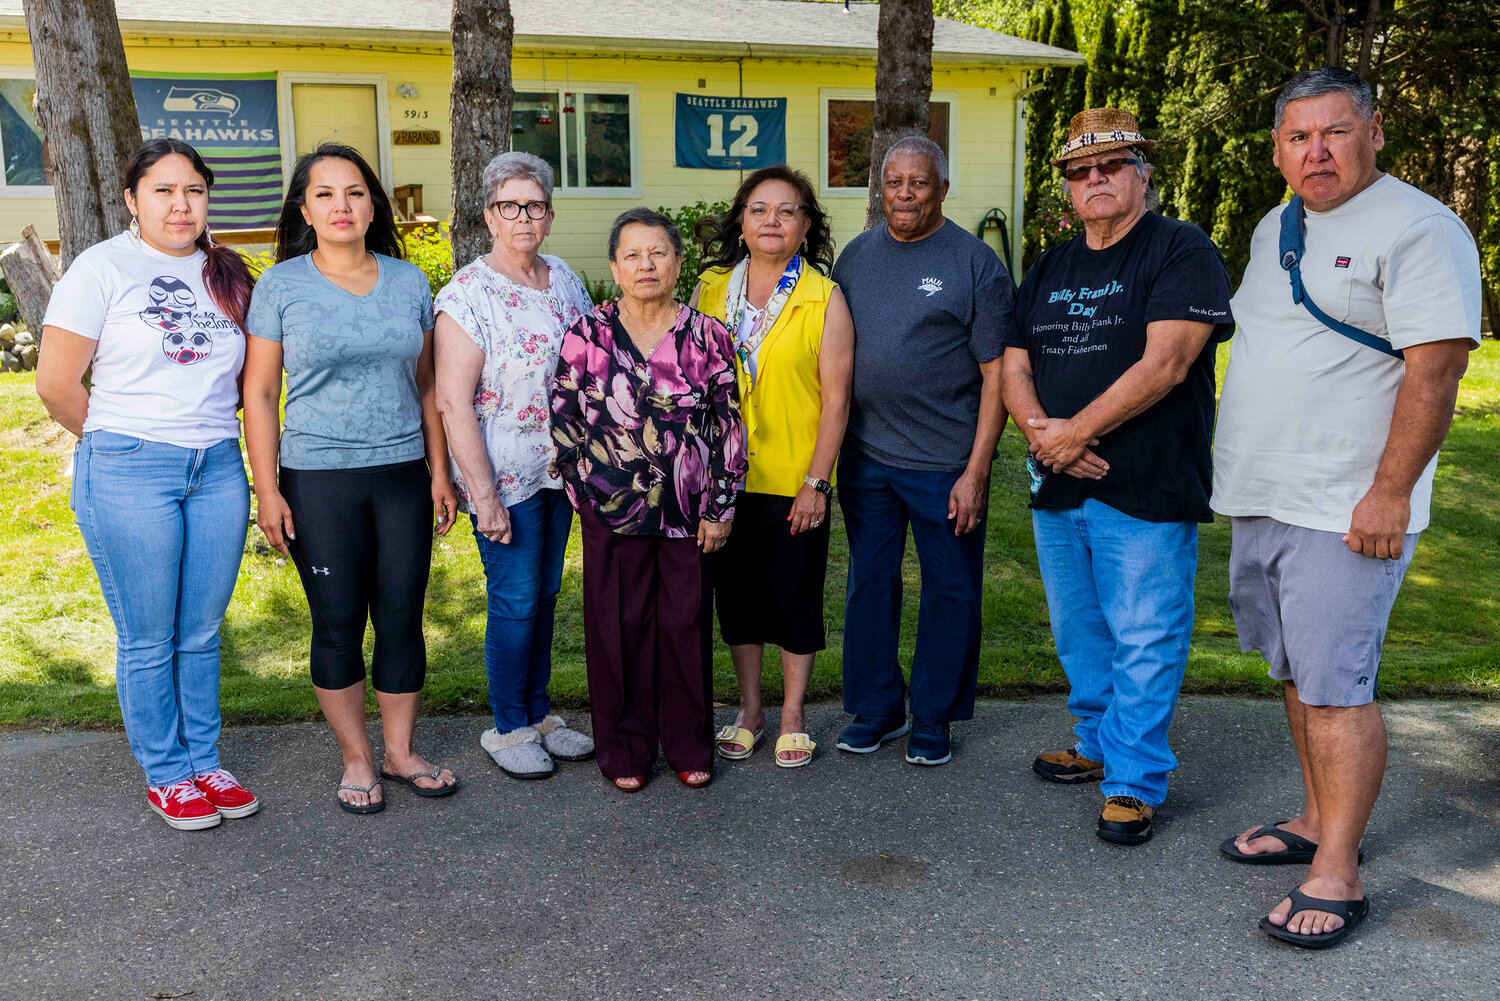 Some of those fighting eviction by the Nooksack Indian Tribe and their supporters are Santana Rabang, left, Rachel Rabang, Billie Rabang, Norma Aldredge, Michelle Roberts, Eugene Aldredge, George Adams and Richard Gladstone. (Daniel Kim/The Seattle Times/TNS)